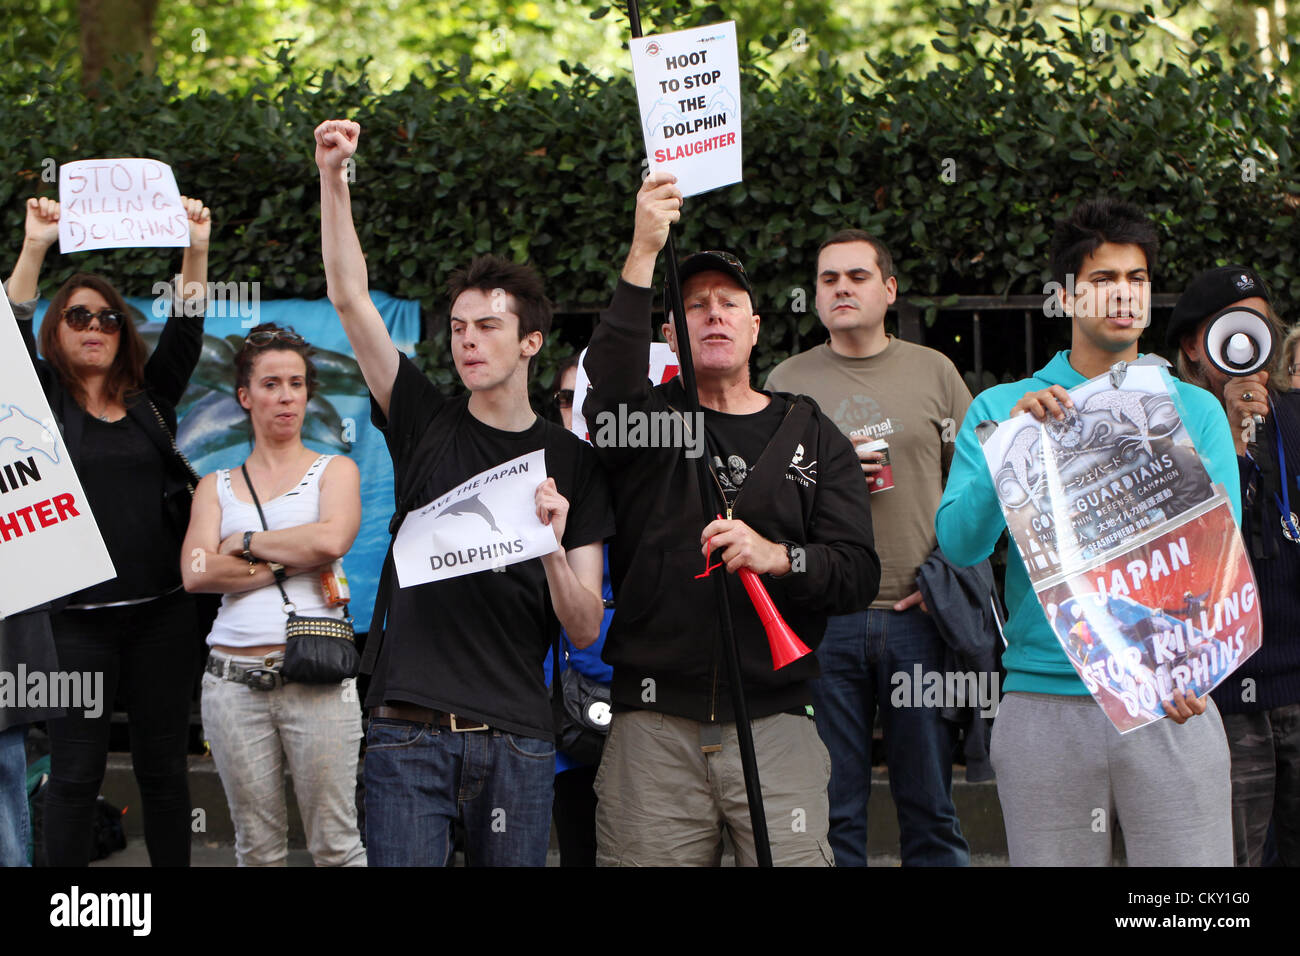 Protesting against Japanese dolphin slaughter - London. Around 50 people gathered outside the Japanese embassy in London today (31.8.12) to protest against the slaughter of dolphins and small whales in Japan. The peaceful protest fights against the start of the annual Taiji dolphin cull as seen in the documentary The Cove which takes place on September 1st. Stock Photo